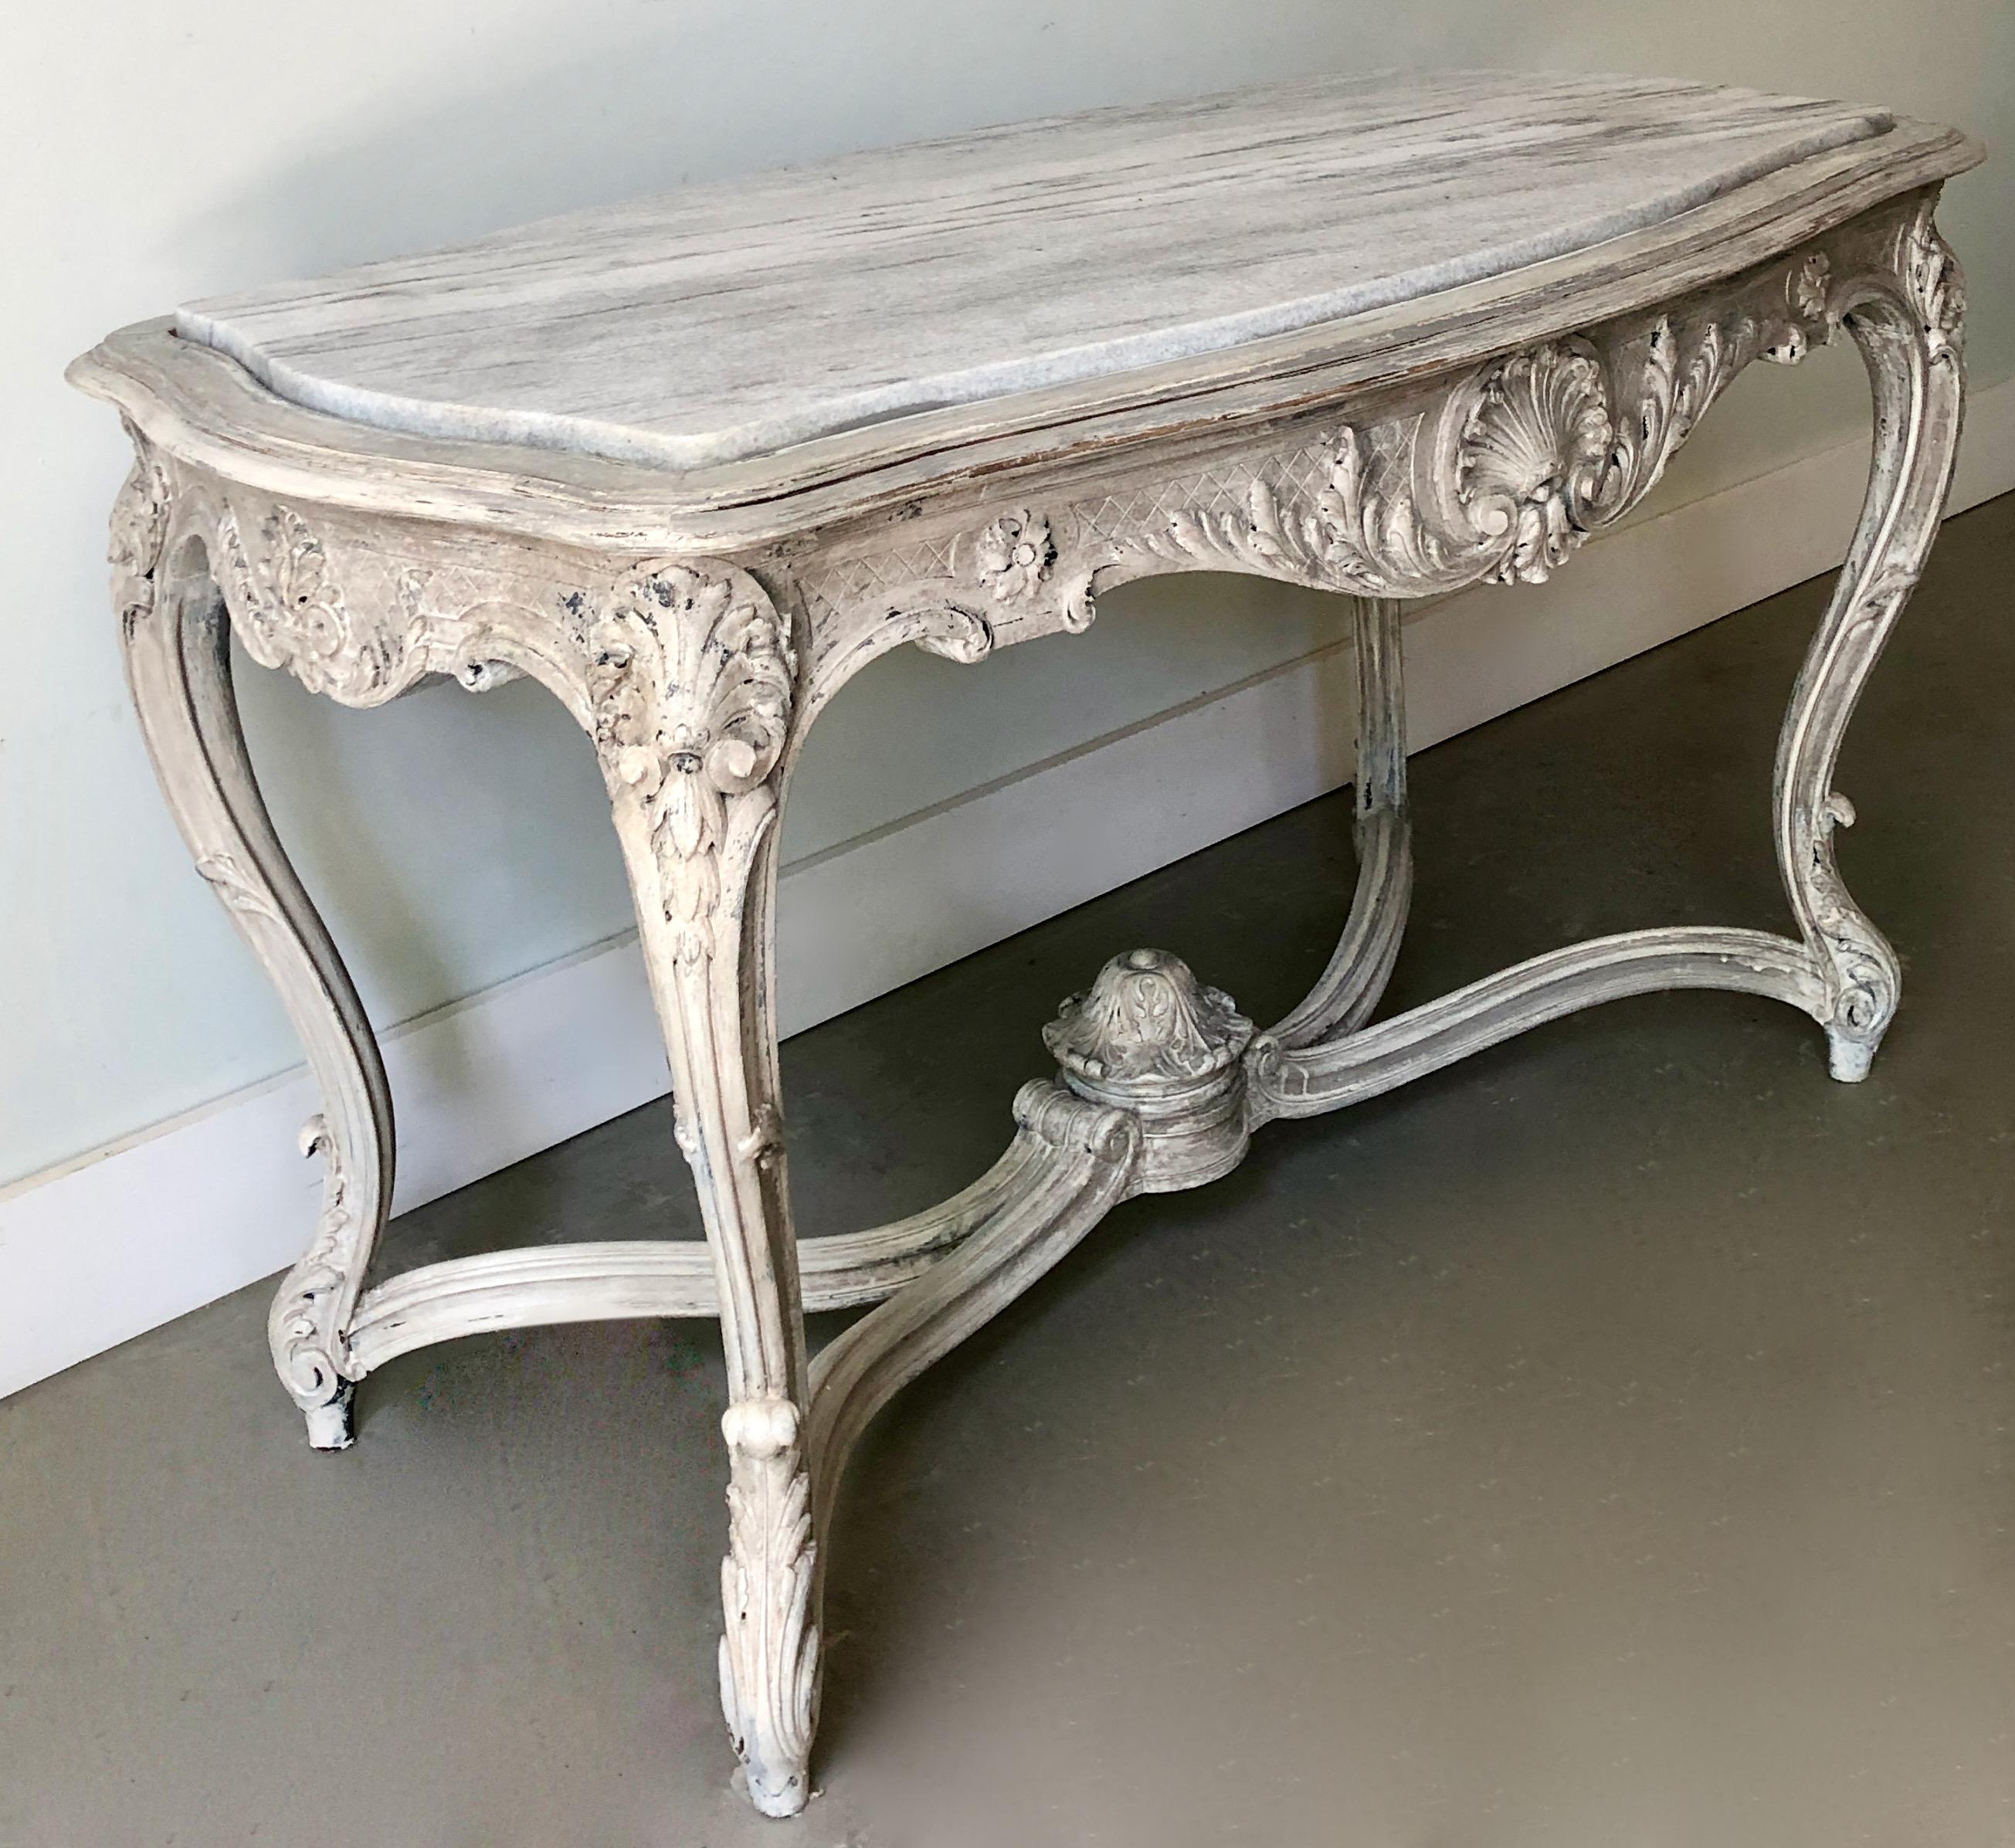 19th century French center table with serpentine shaped inset marble top. Richly carved four sided apron and raised elegant cabriole legs are joined by a shaped stretcher, centered a hand-carved urn finial.
Original broken marble top replaced.
   